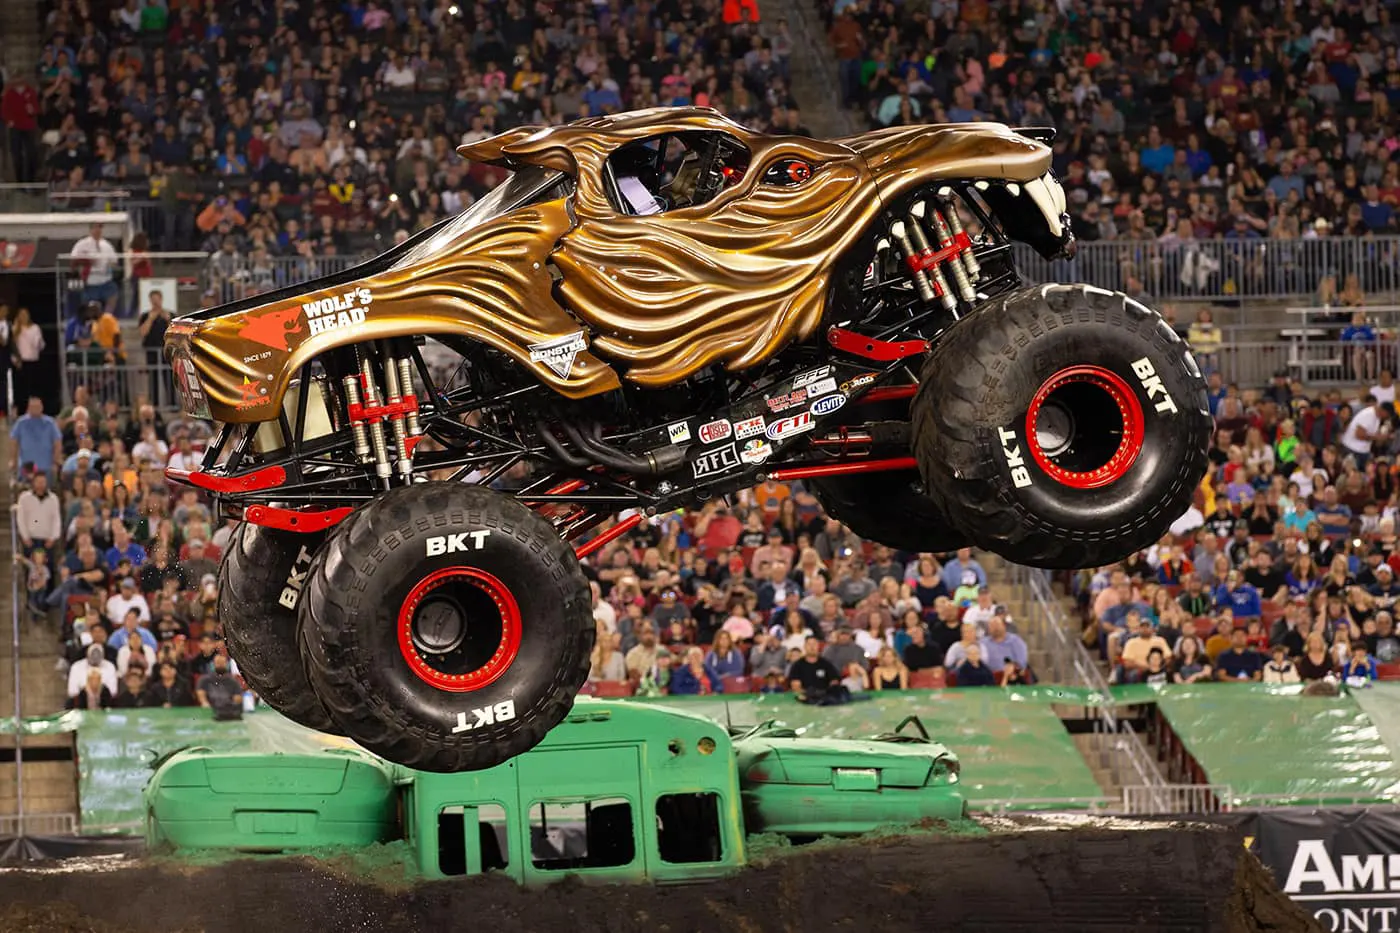 Upcoming Monsters of Destruction Monster Truck Shows across the